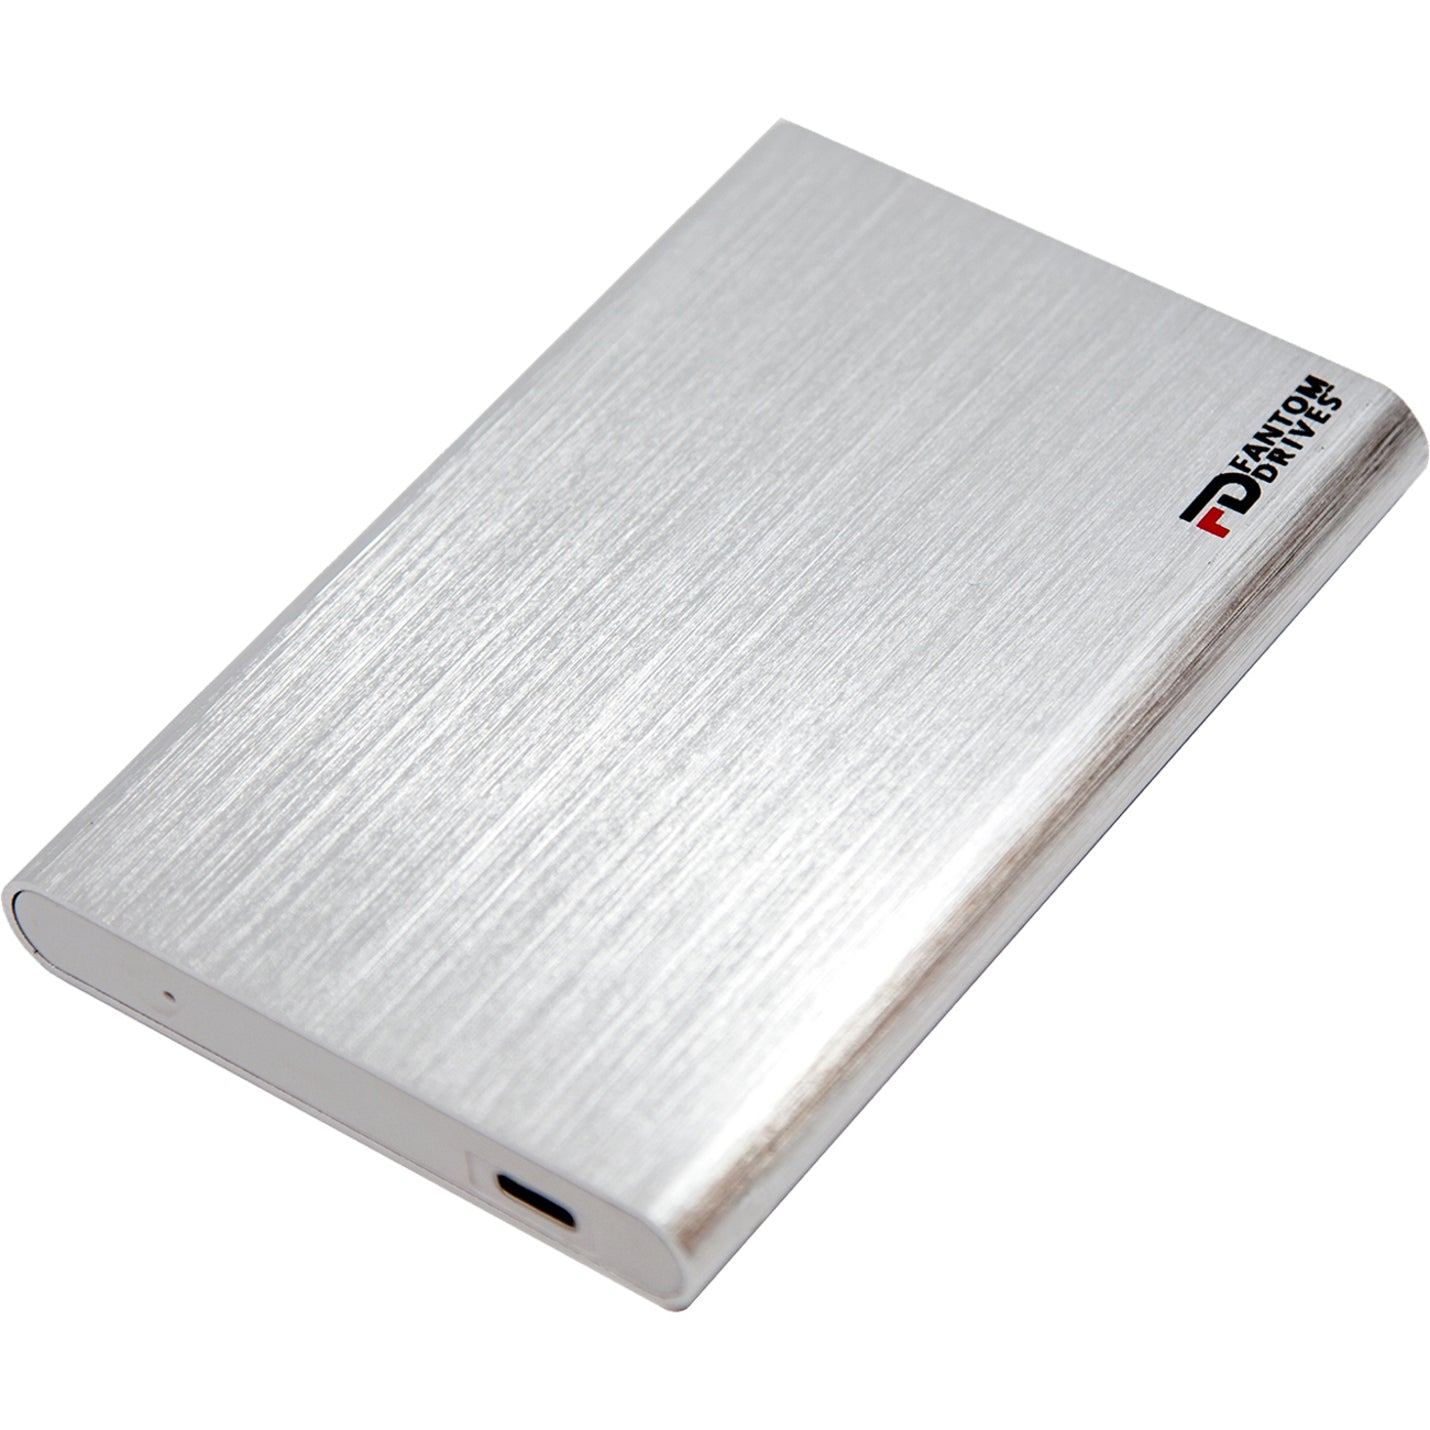 Fantom Drives FD GFORCE 3.1 - 480GB Portable SSD - USB 3.1 Gen 2 Type-C 10Gb/s - Silver - Mac Plug and Play - Made with High Quality Aluminum - Transfer Speed up to 560MB/s - 3 Year Warranty - (CSD480S-M)